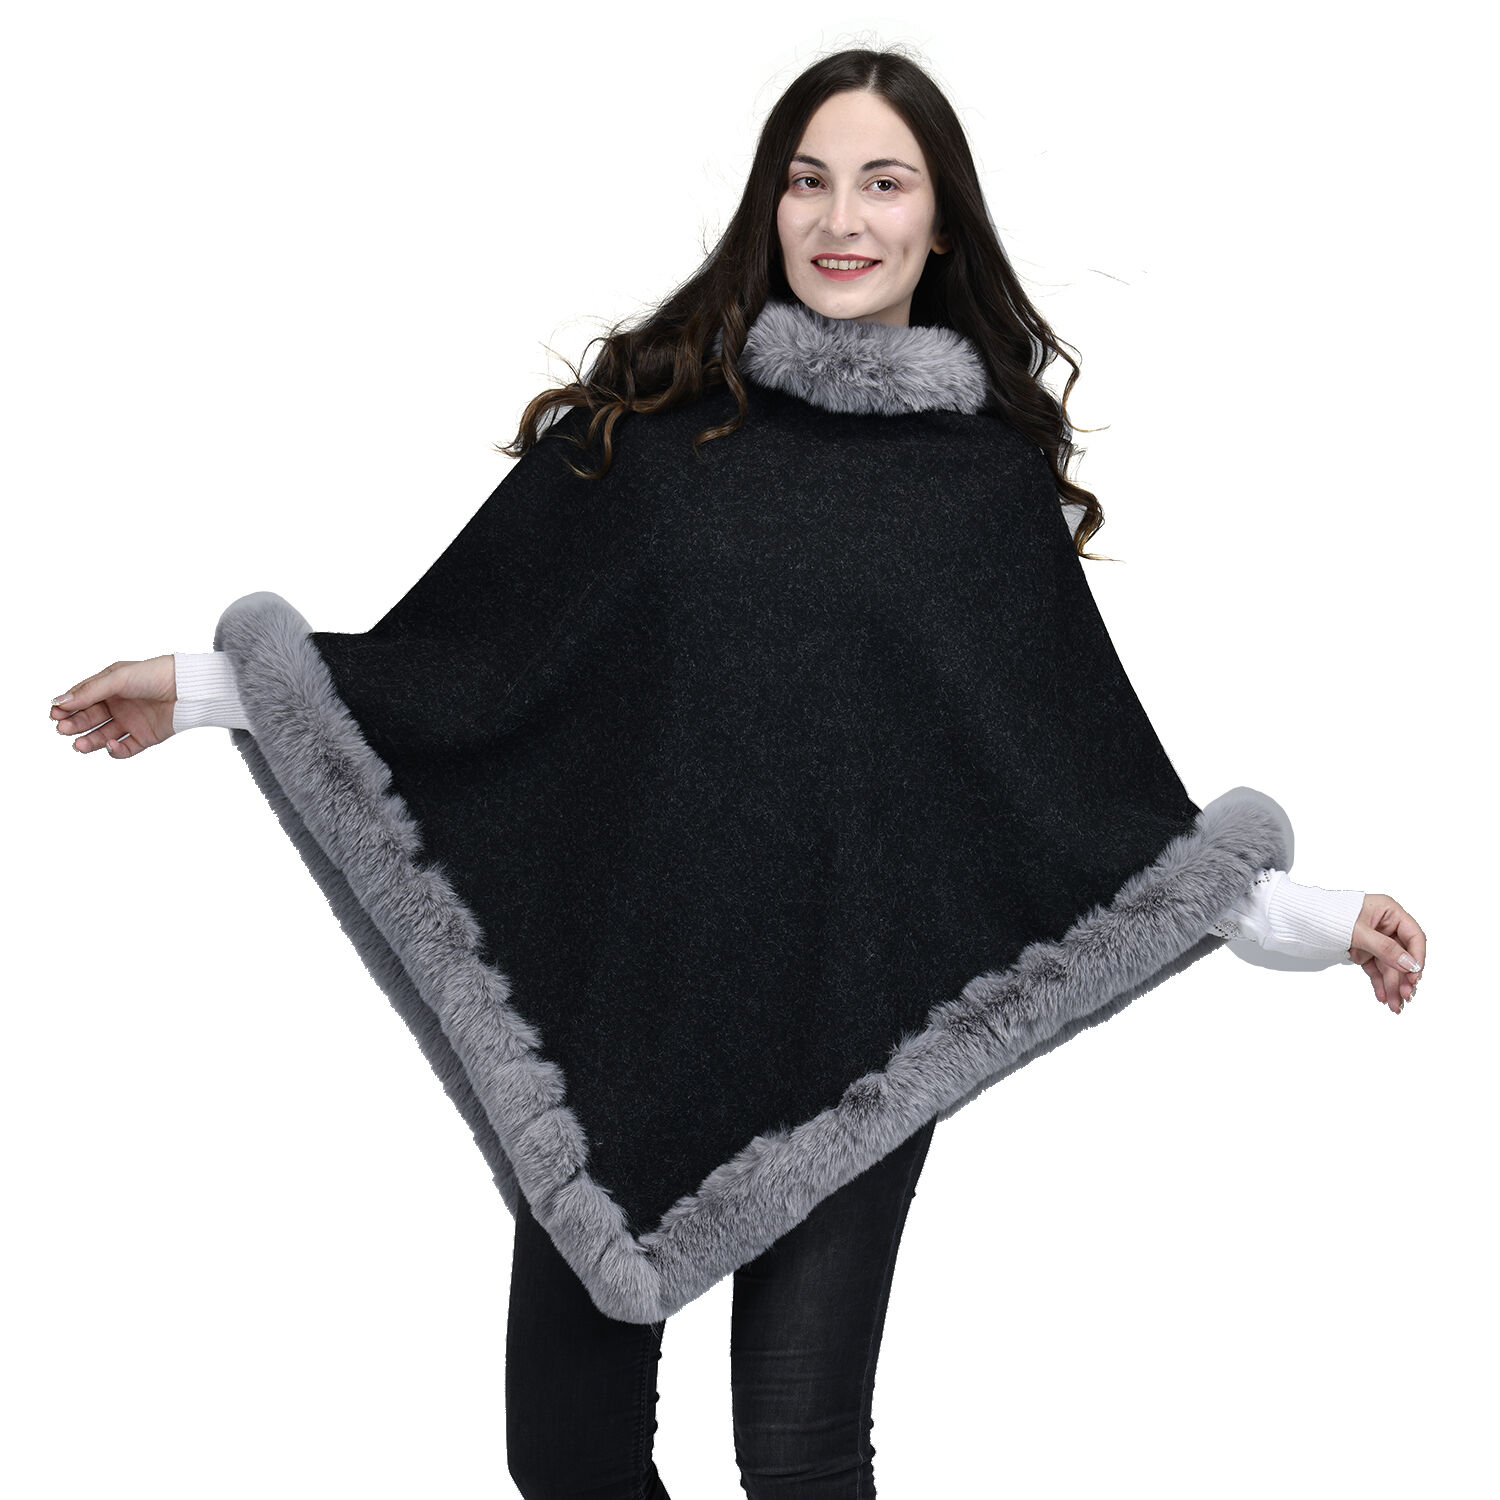 LUXURIOUS WINTER WEIGHT CAPE PONCHO SHAWL IN 4 COLS ONE SIZE FITS UP TO SIZE 32 